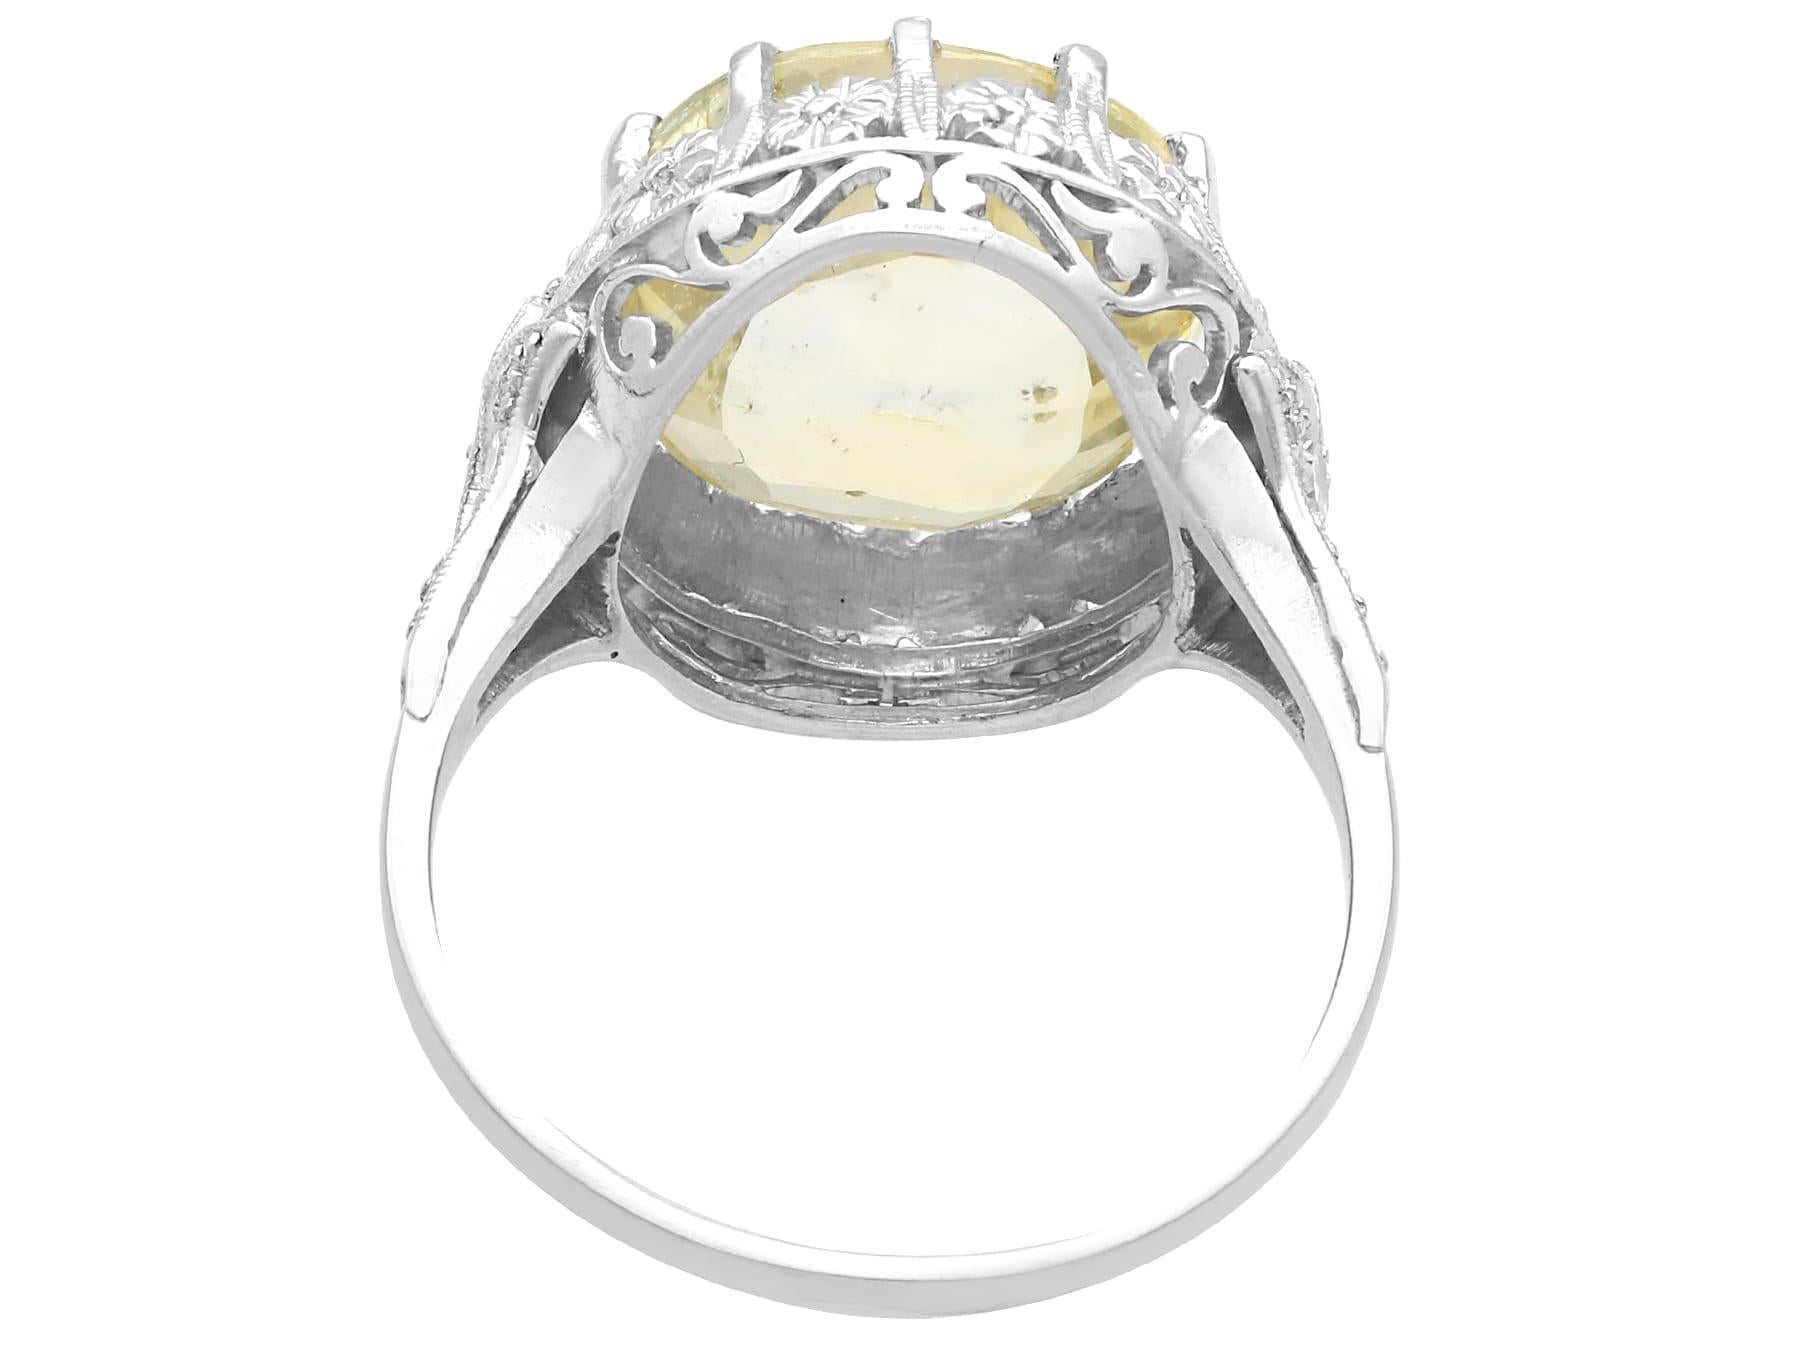 Antique 6.81 Carat Yellow Sapphire and Diamond Platinum Dress Ring circa 1920 In Excellent Condition For Sale In Jesmond, Newcastle Upon Tyne